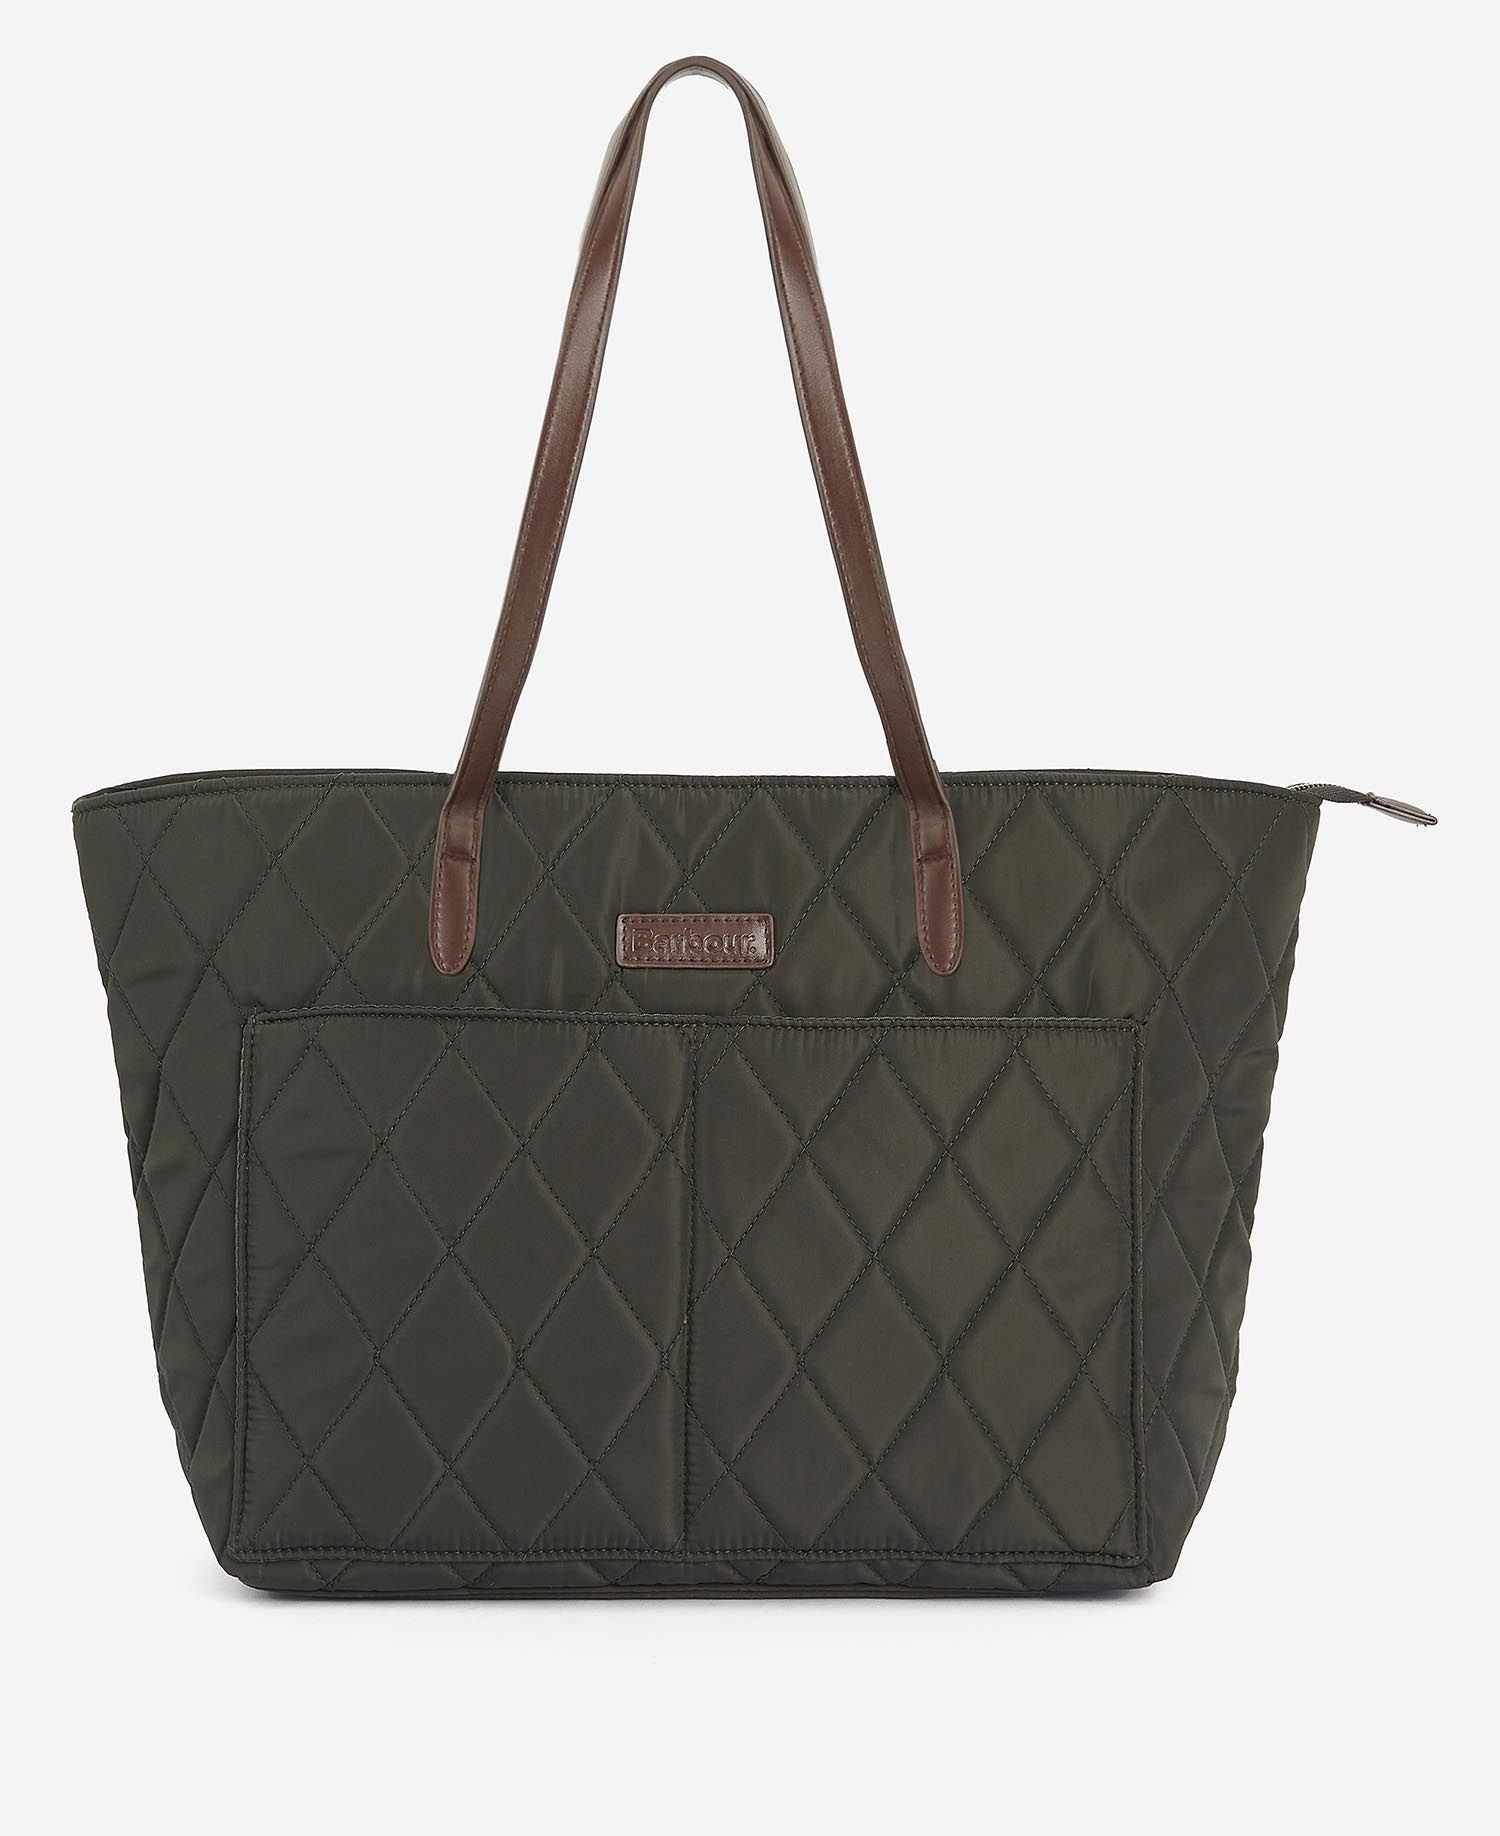 BARBOUR Women's Quilted Tote Bag LBA0395 Olive